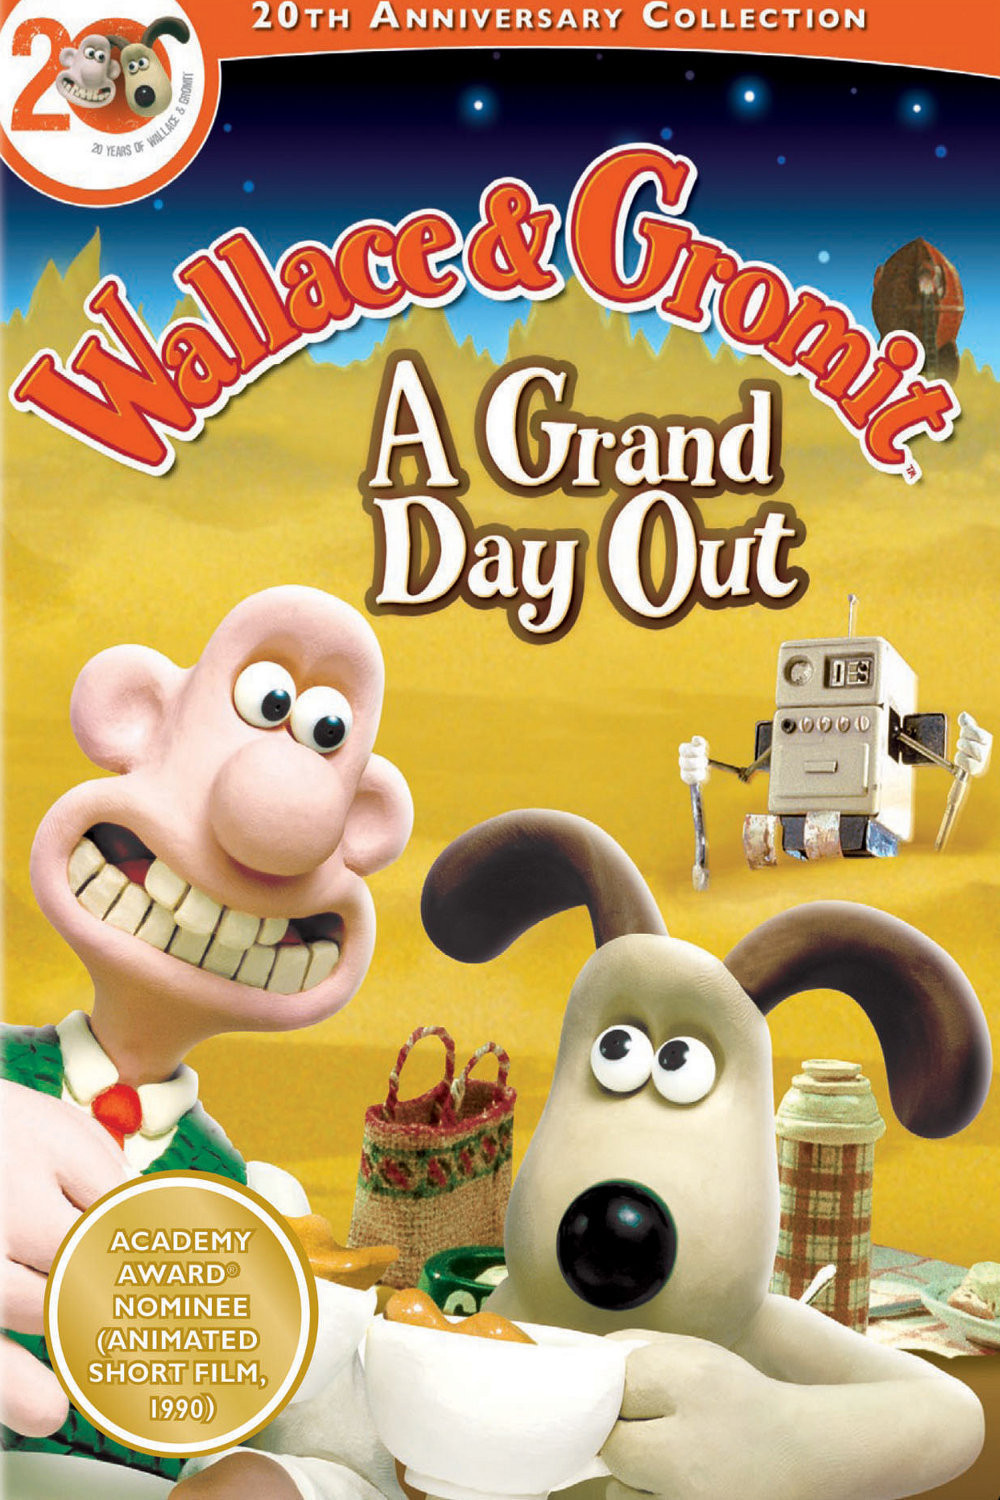 watch-a-grand-day-out-with-wallace-and-gromit-online-watch-full-a